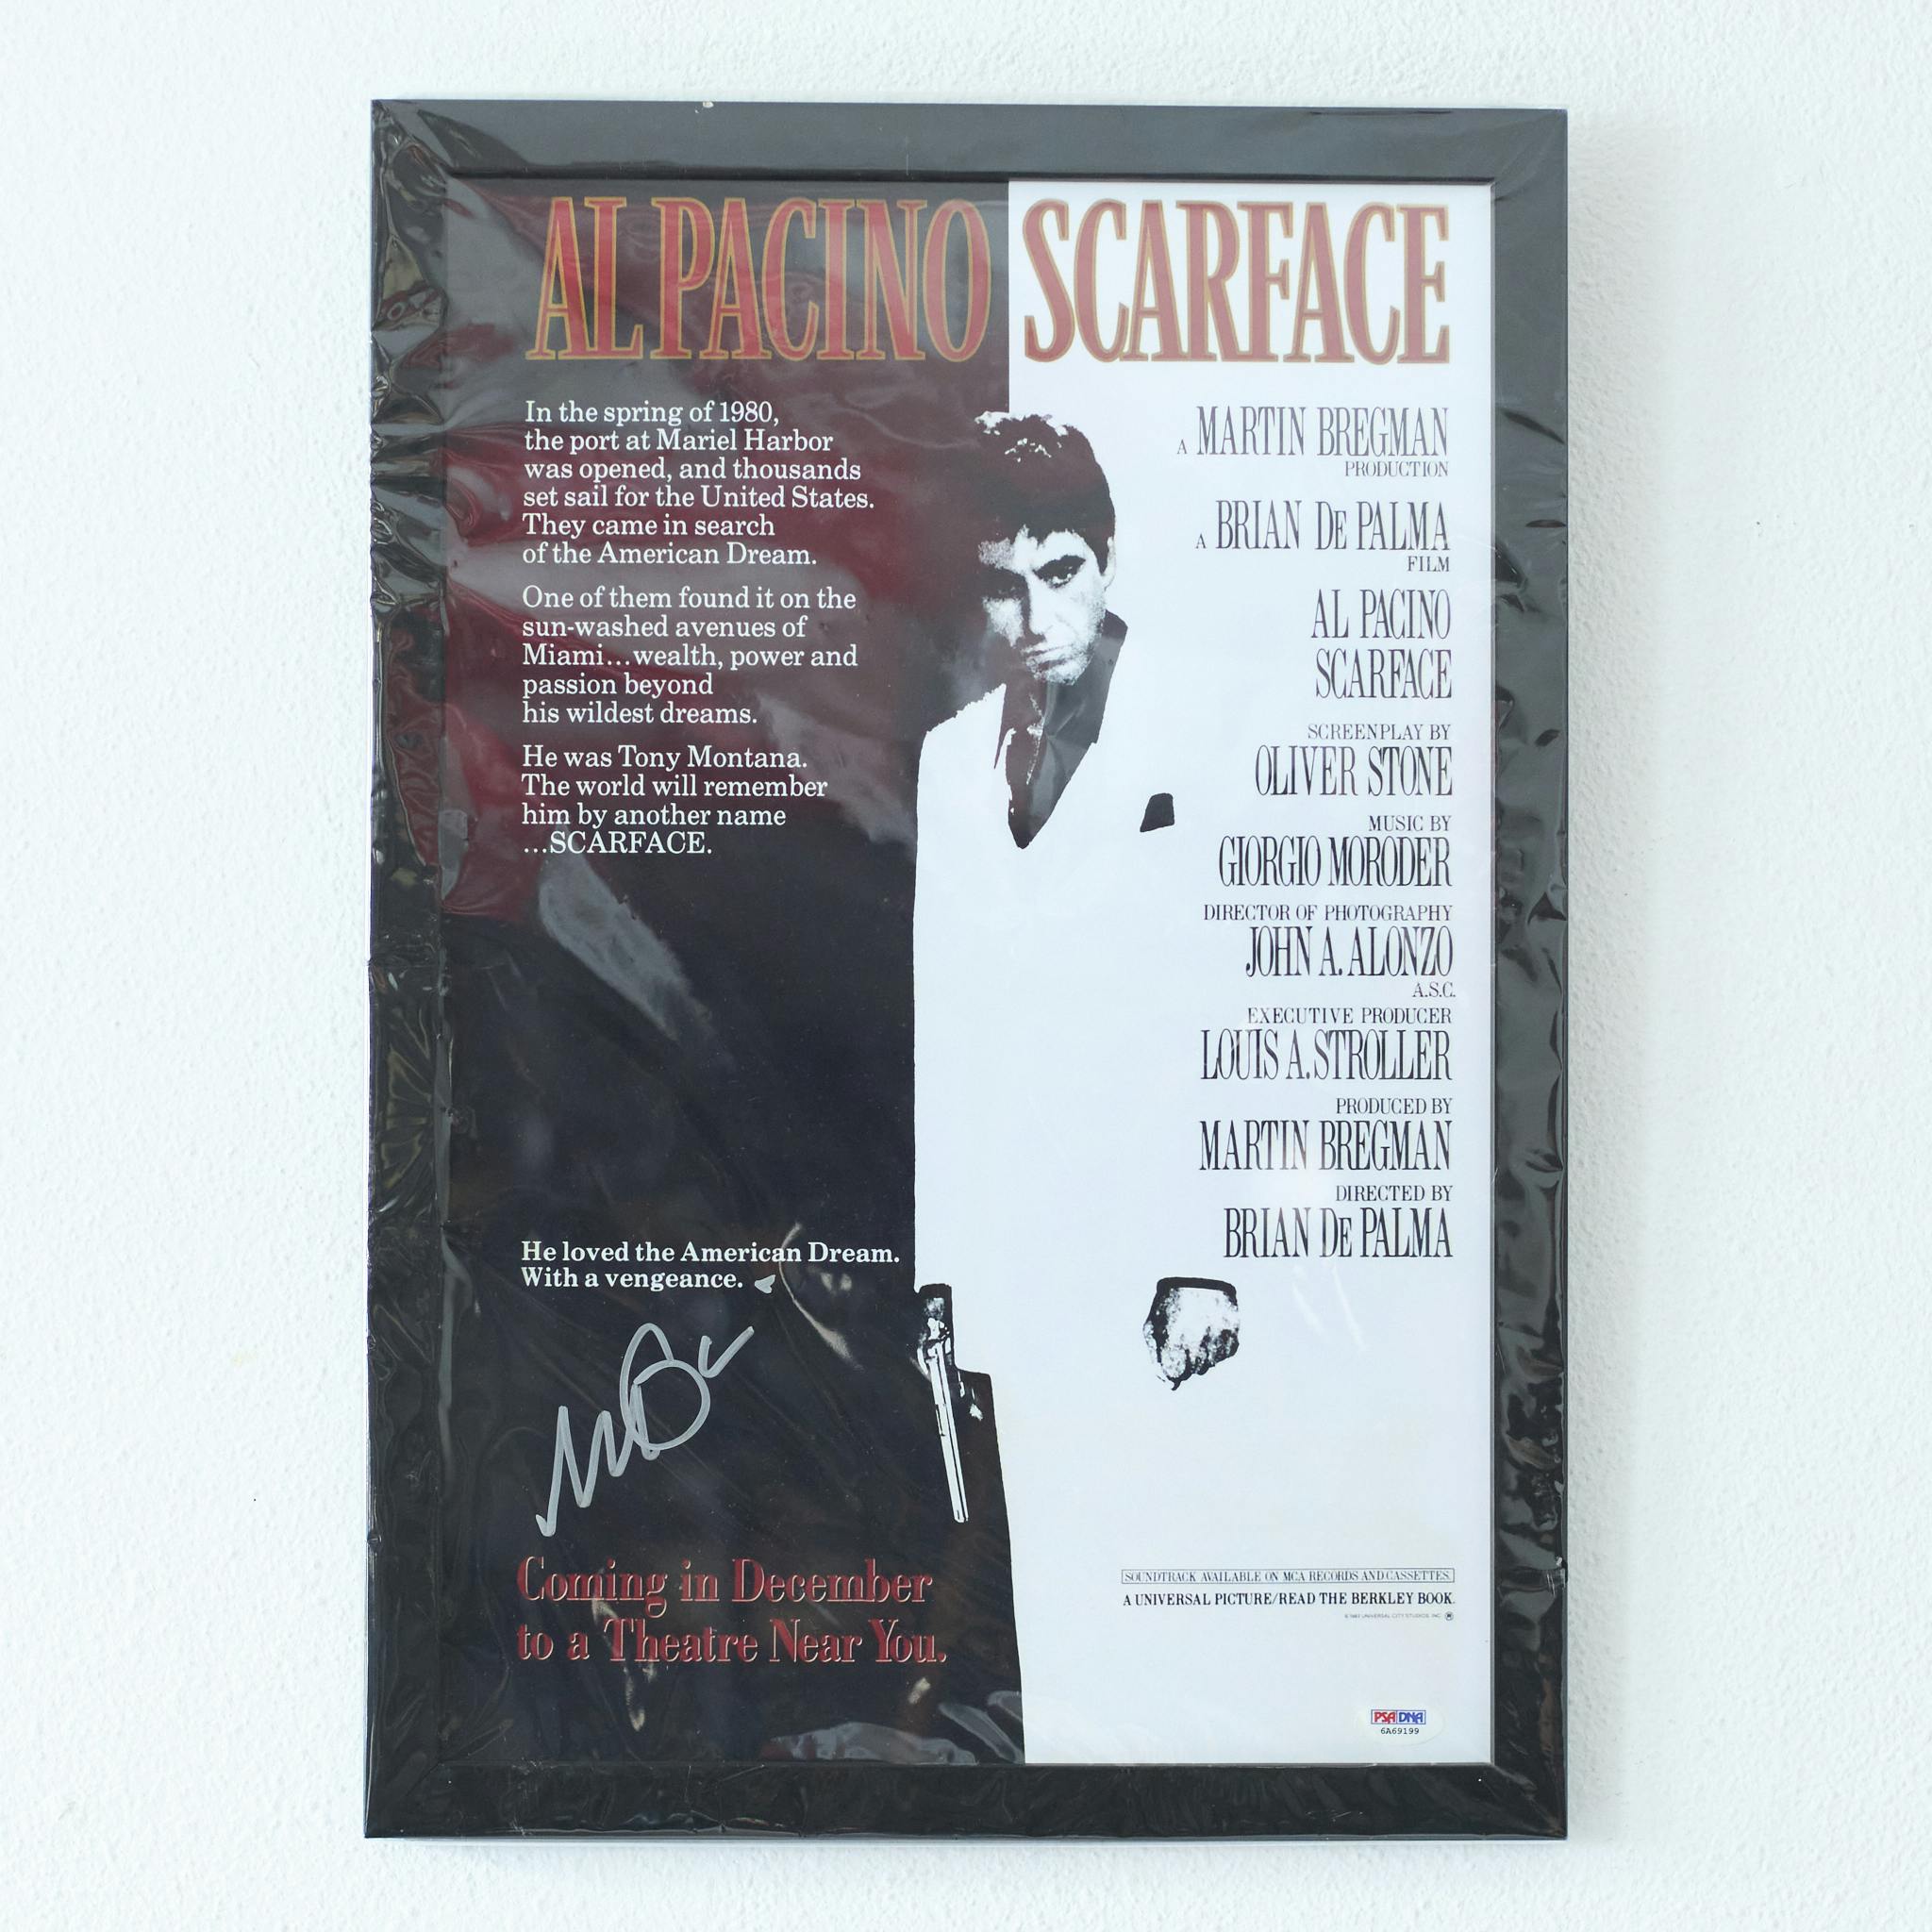 Al Pacino Scarface Movie Poster Autographed PSA Certified - 1